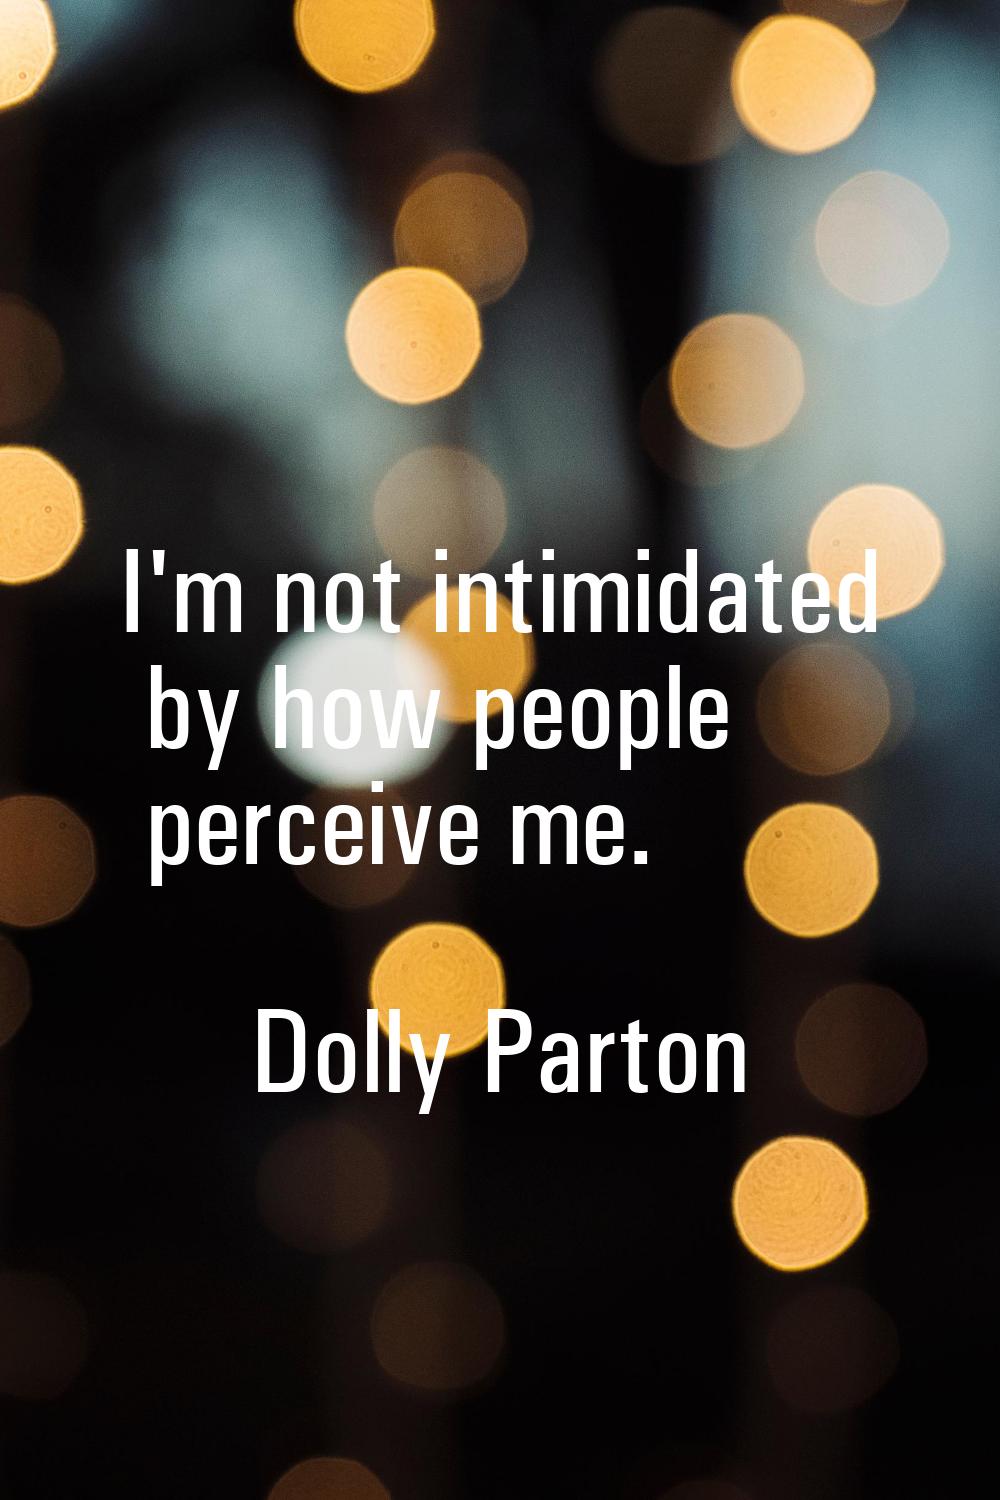 I'm not intimidated by how people perceive me.